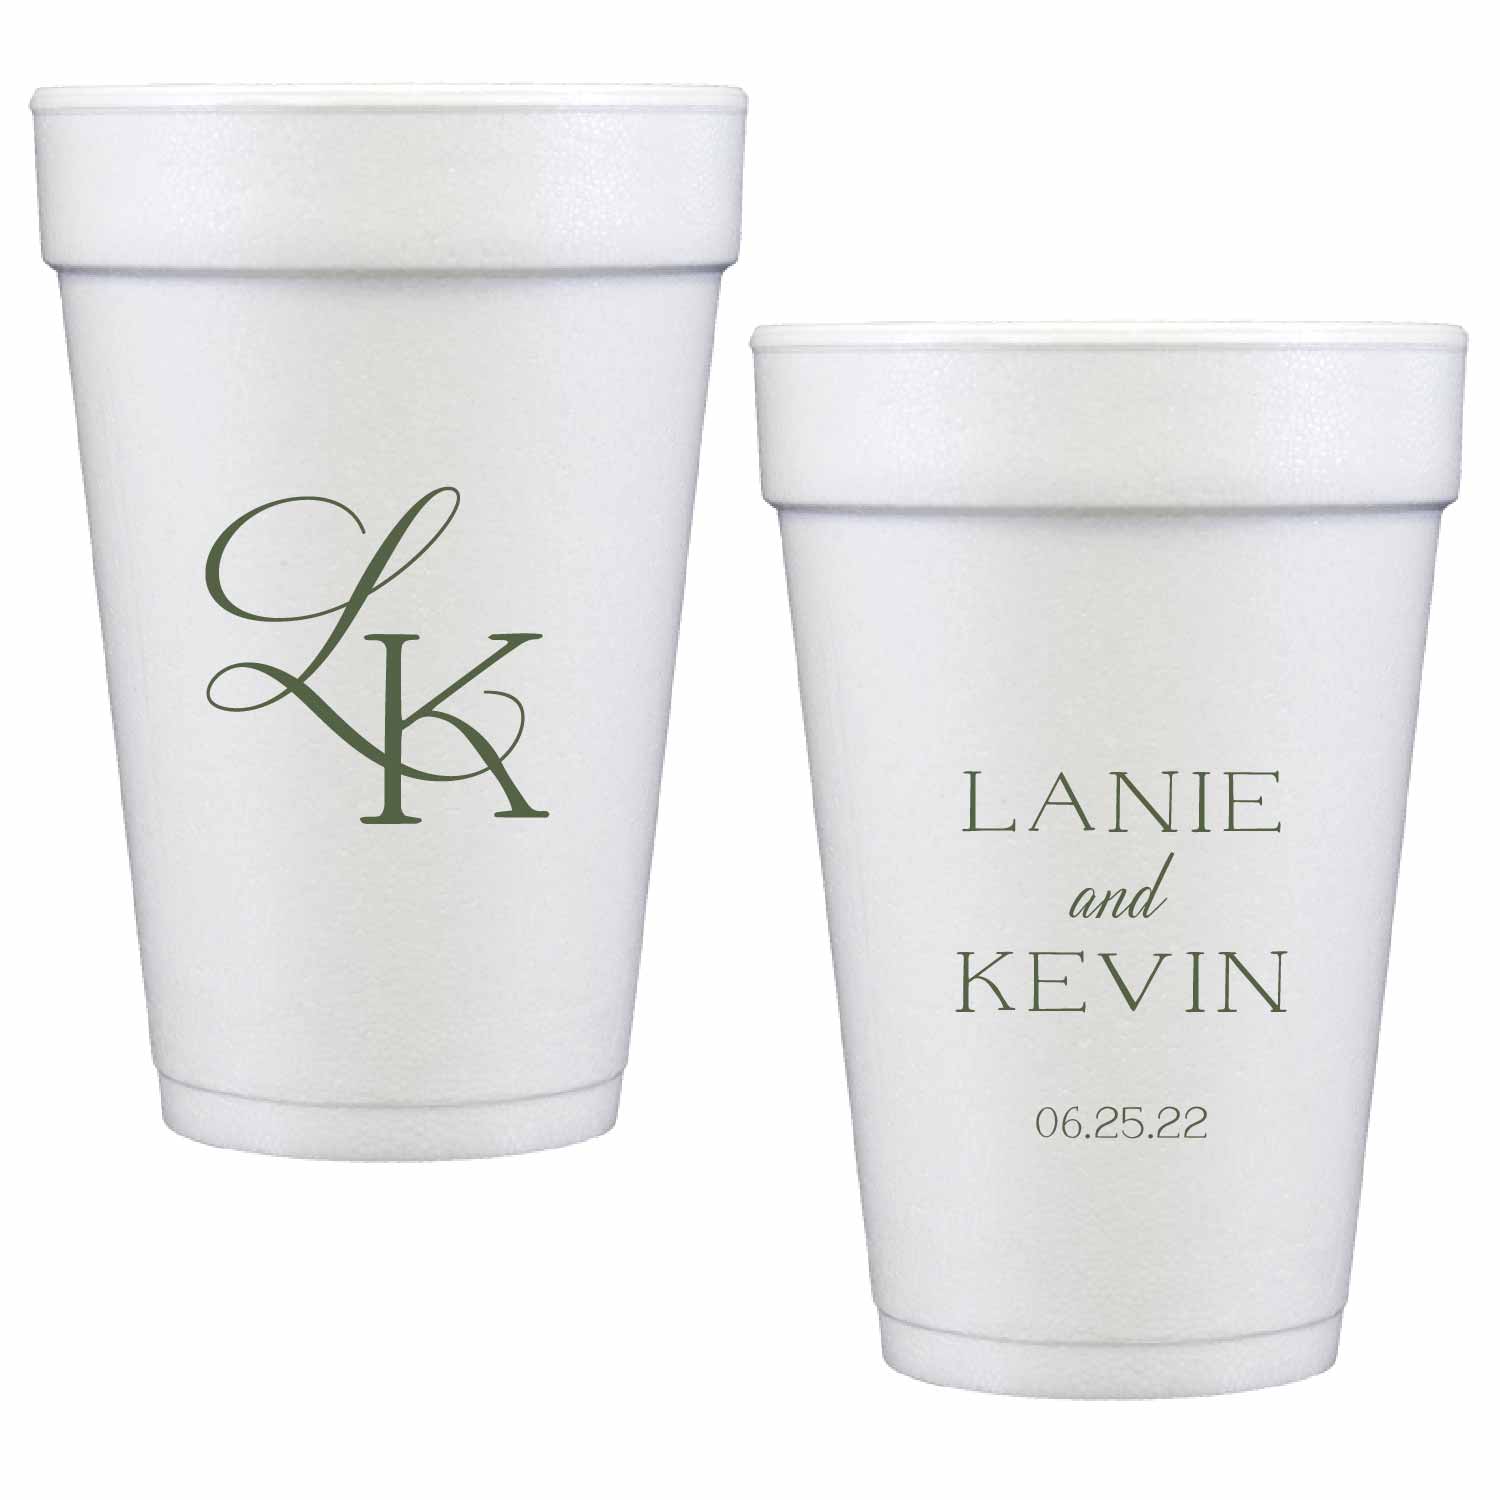 Classic Personalized Styrofoam Cup